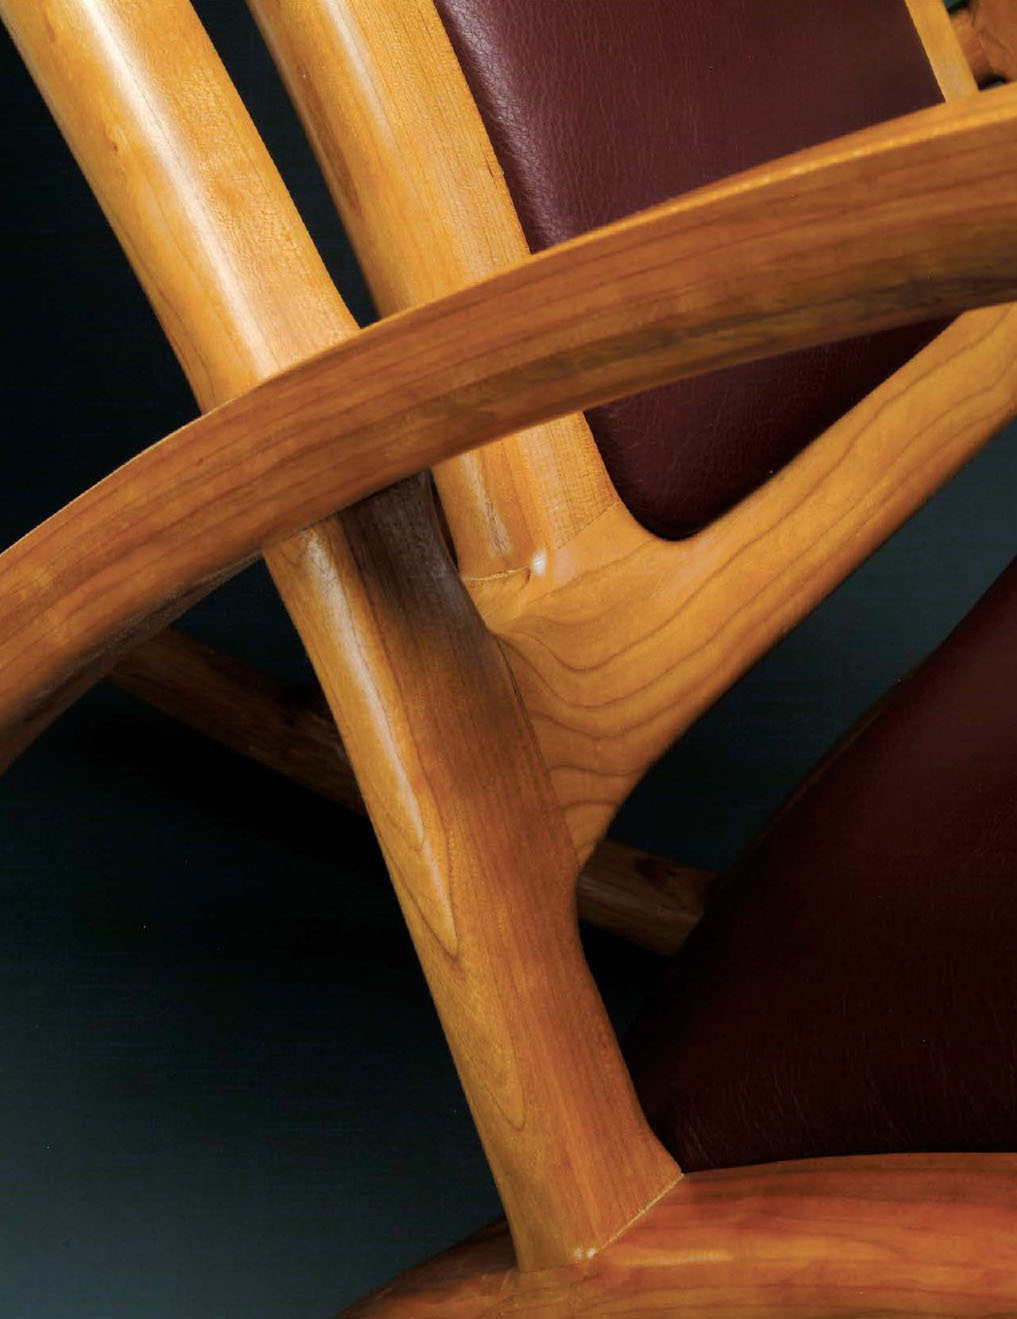 The curved chair arm in this close-up photo was made by gluing many thin layers - photo 3